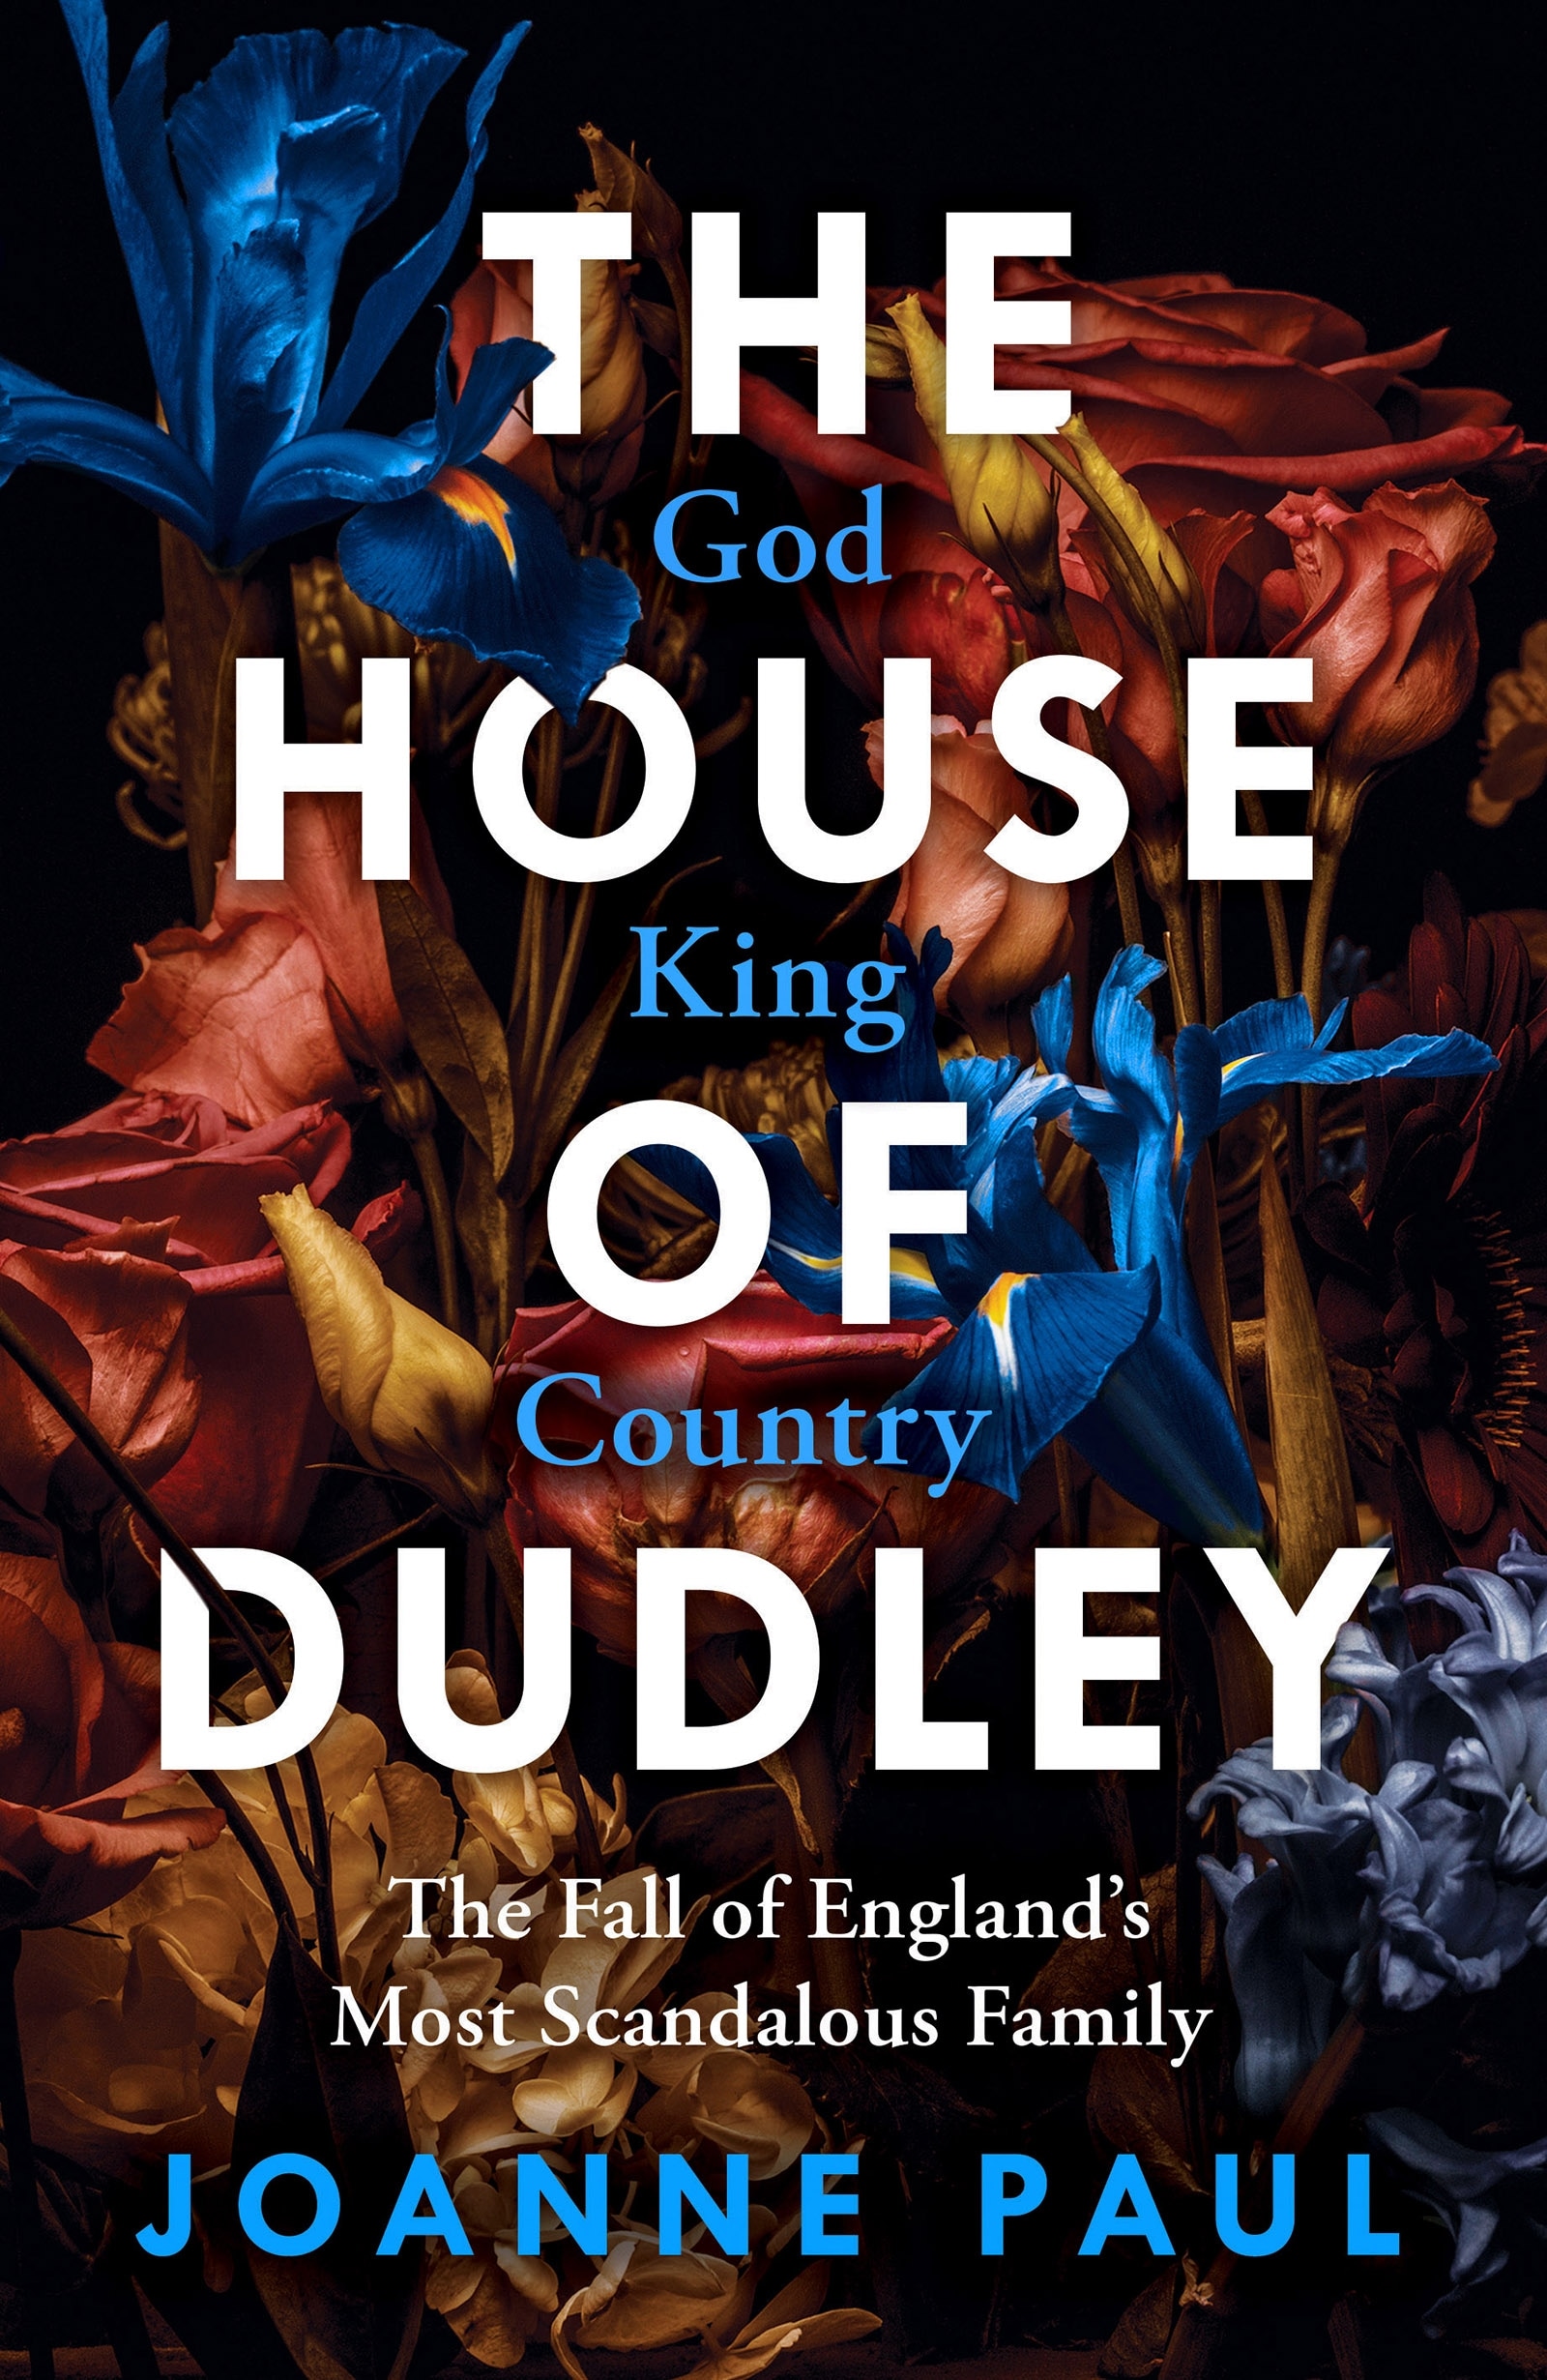 Book “The House of Dudley” by Joanne Paul — March 31, 2022